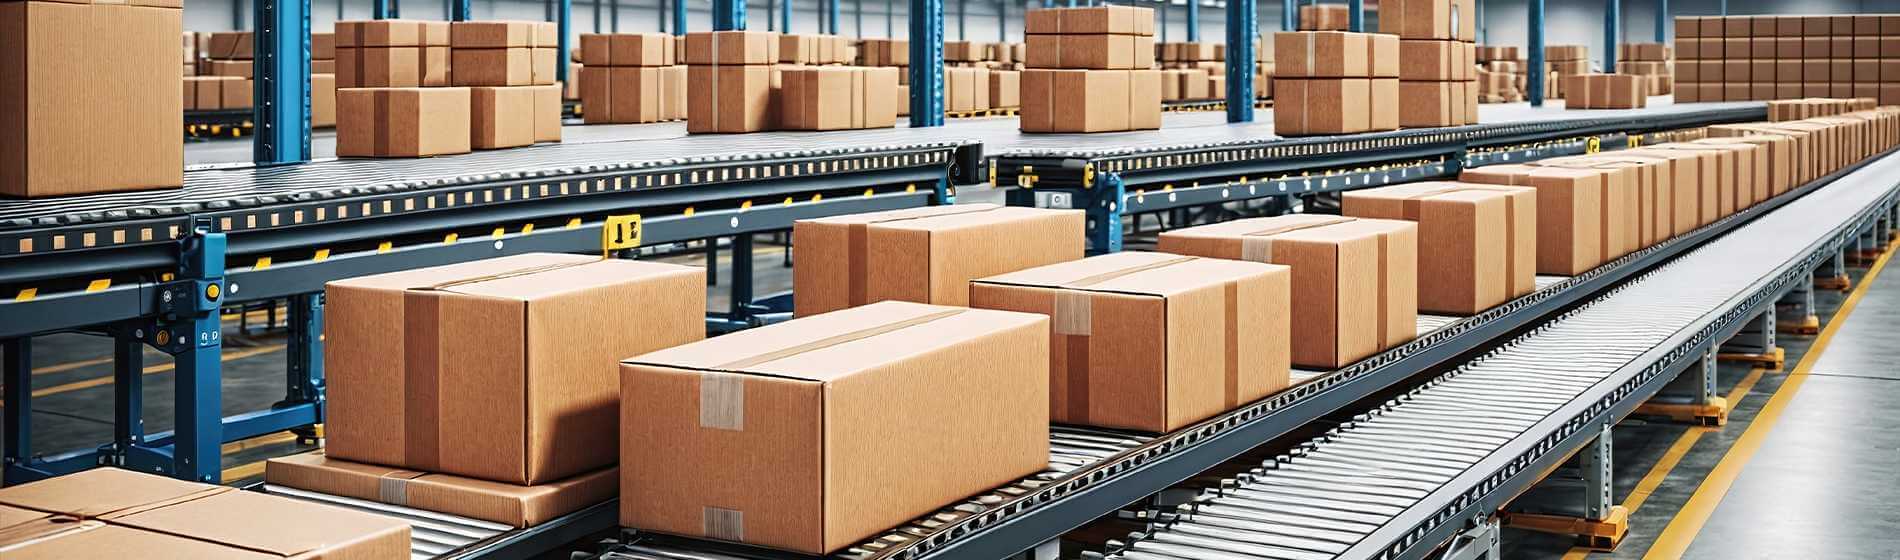 SAP Business One for Packaging Industry